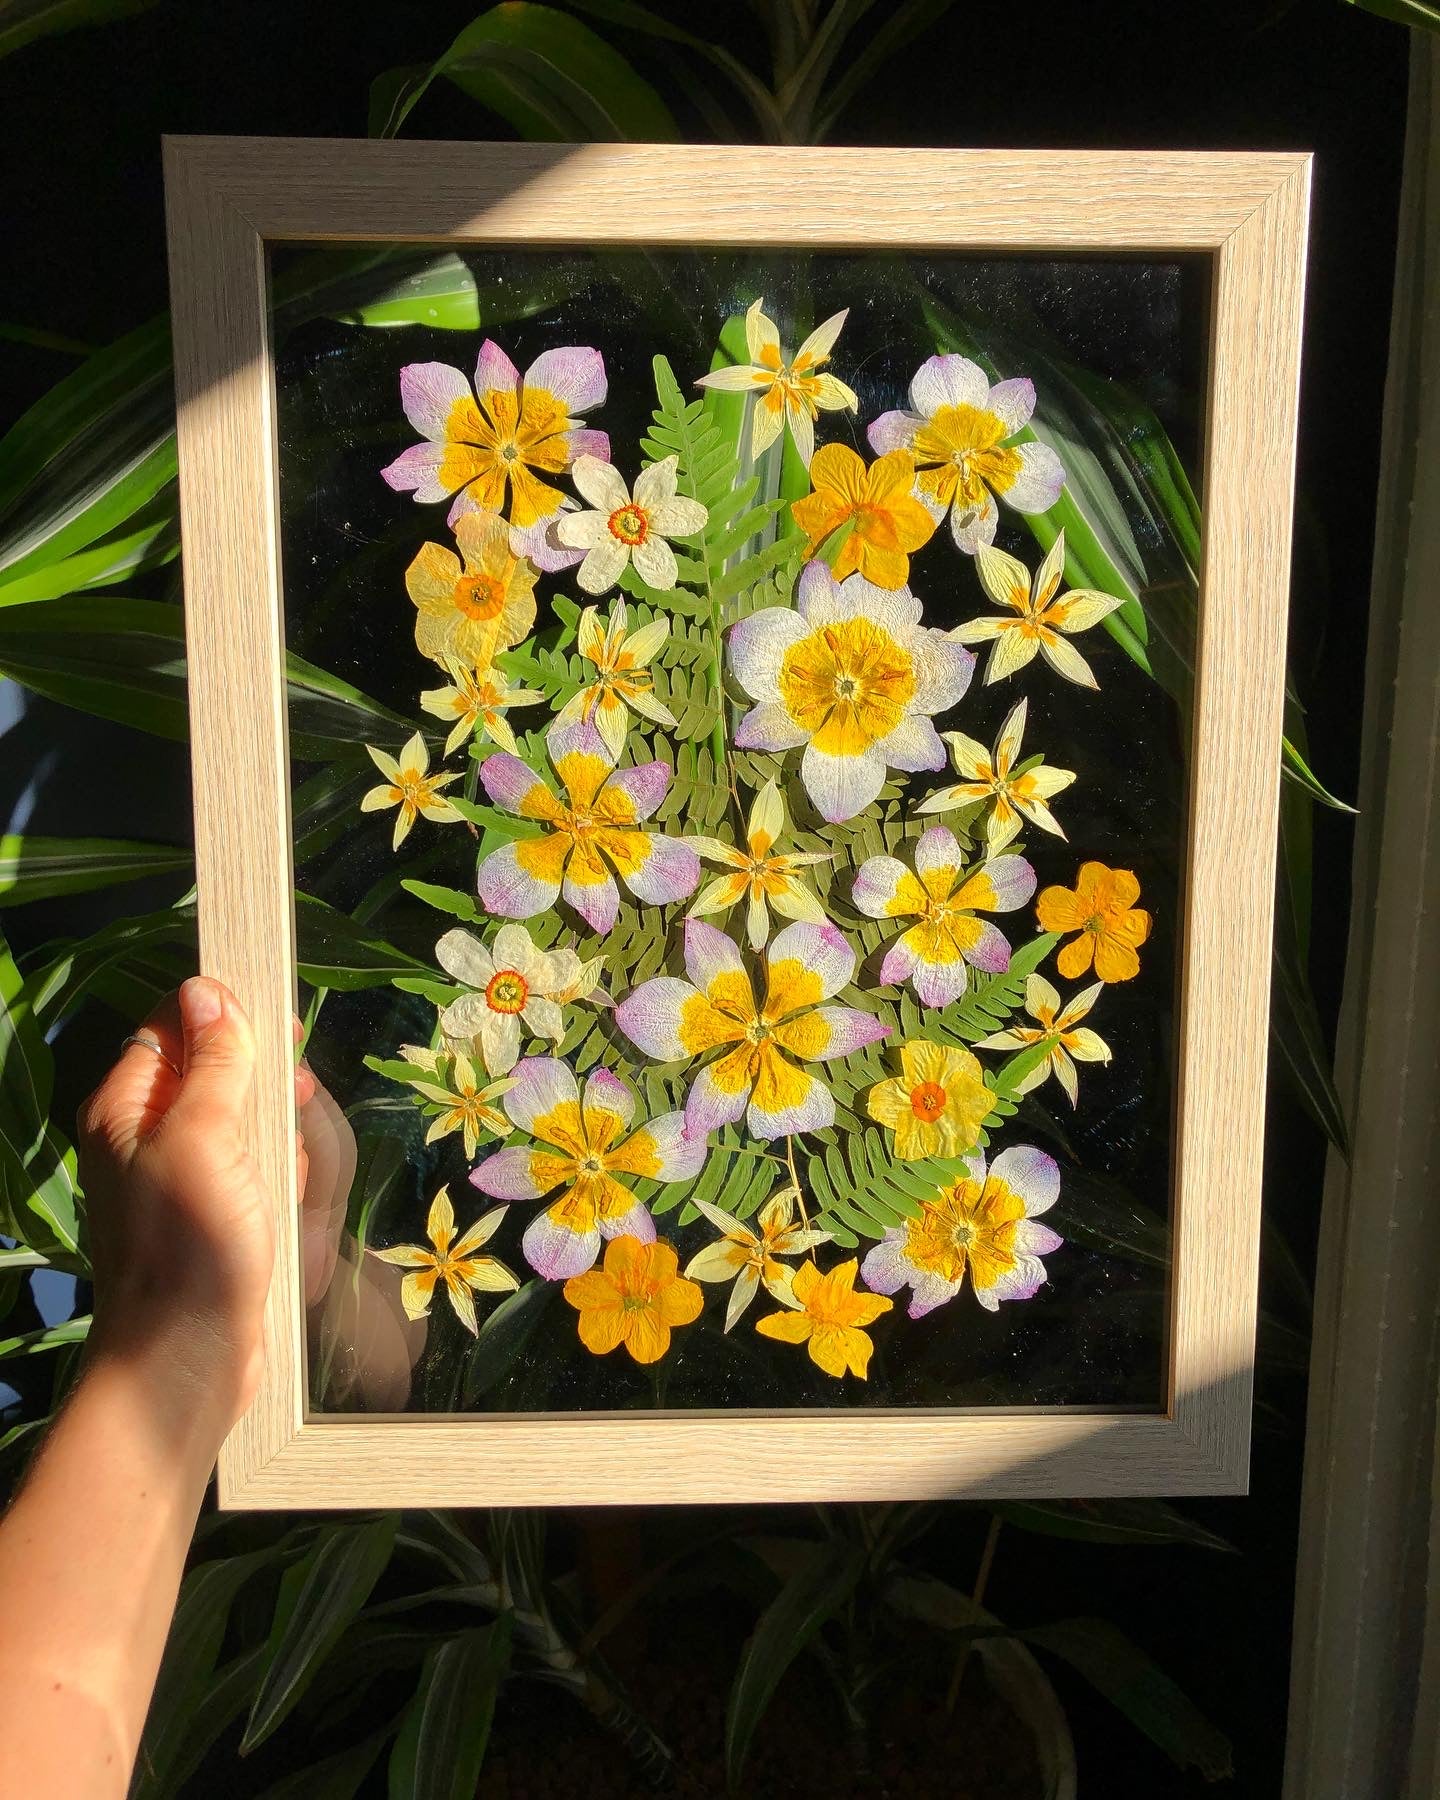 How to Make Pressed Flower Frames - Craft projects for every fan!